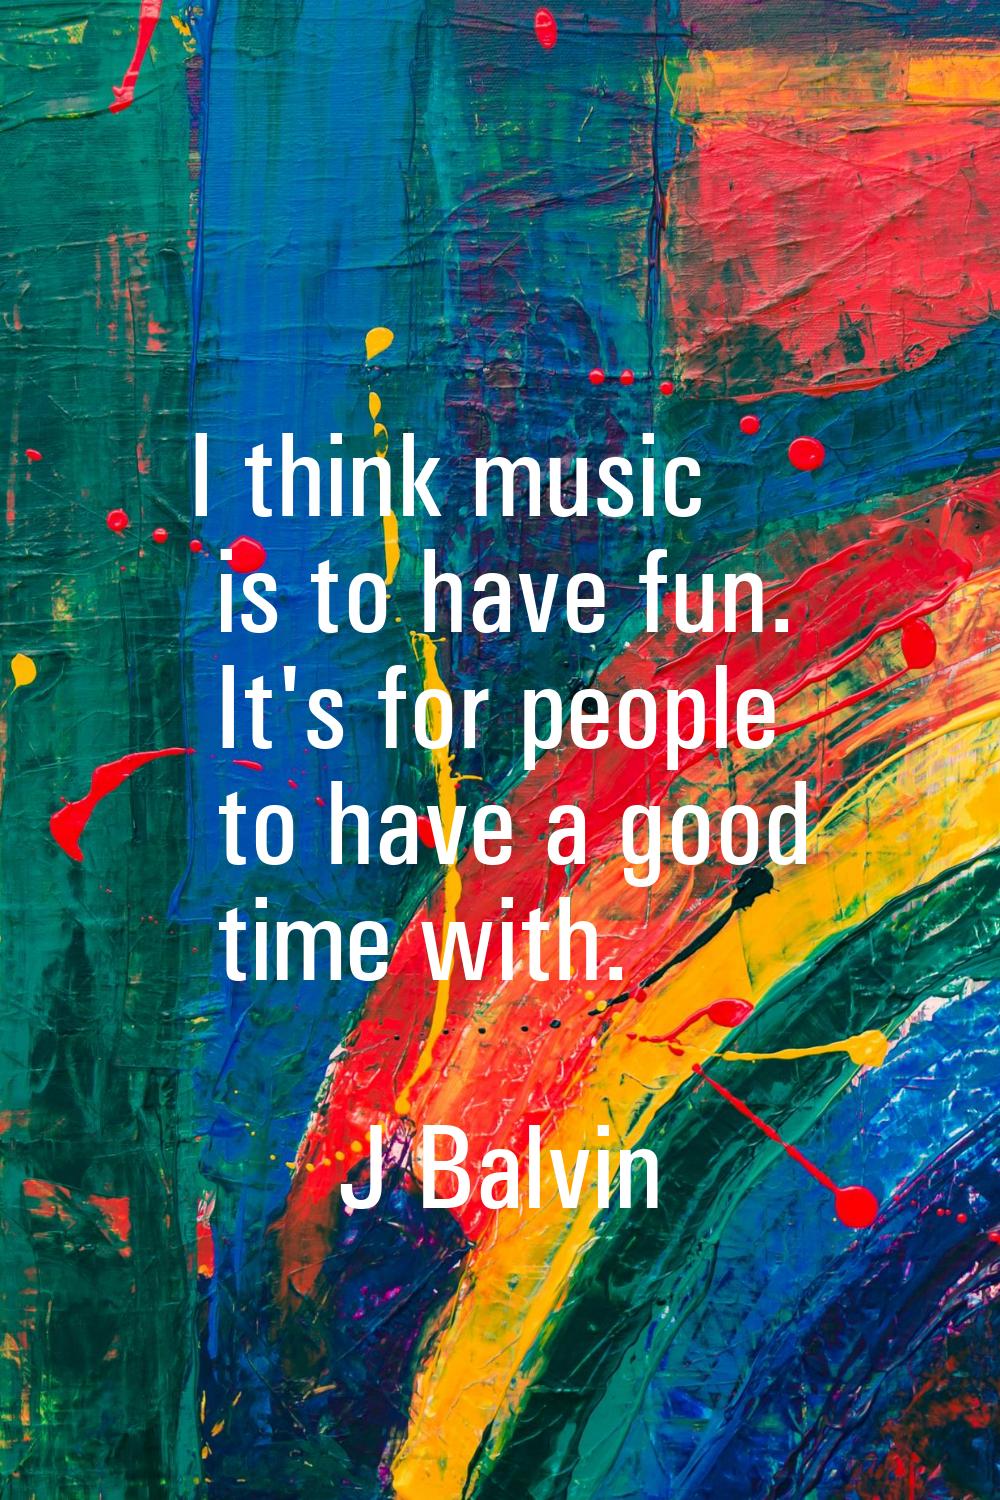 I think music is to have fun. It's for people to have a good time with.